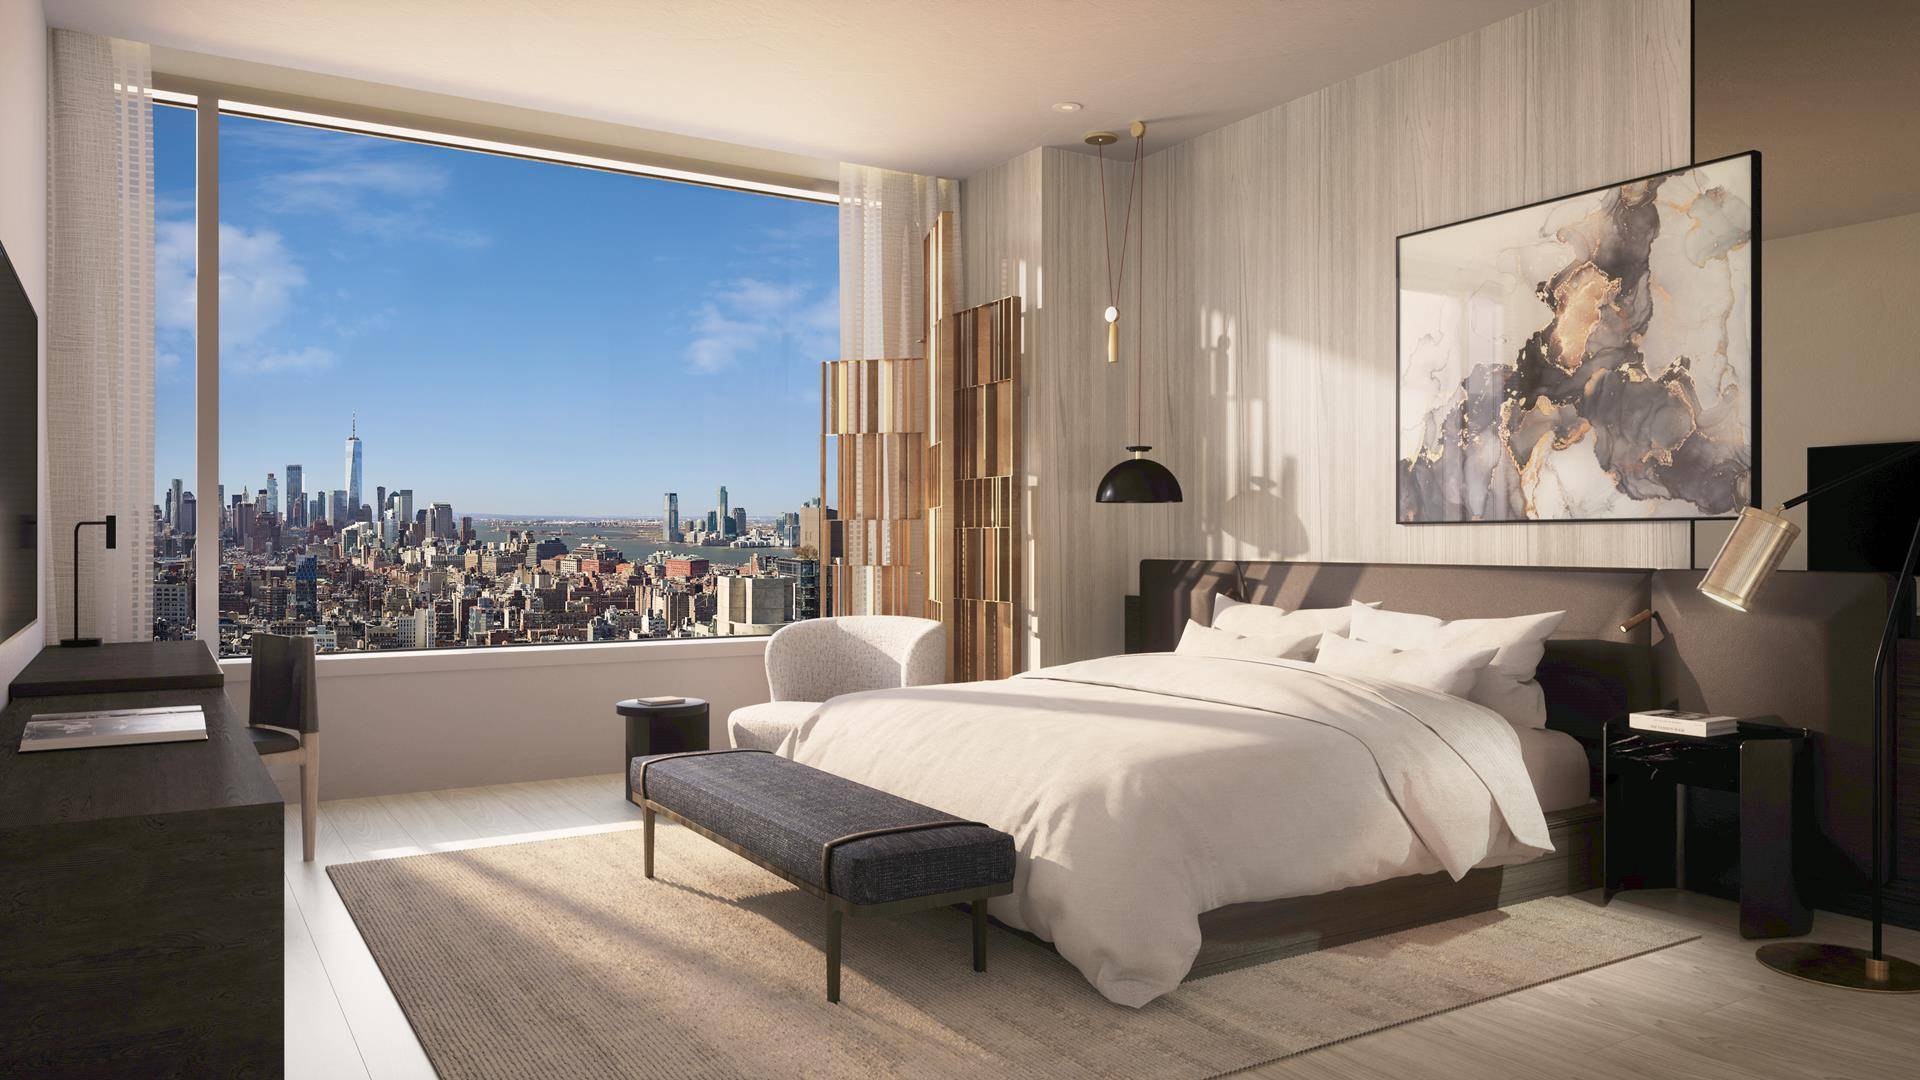 Soaring nearly 500 feet above Manhattan's iconic skyline, and at the very top of the newest tower by internationally acclaimed architect, Rafael Vinoly, PH42D offers a 2 bedroom, 2.